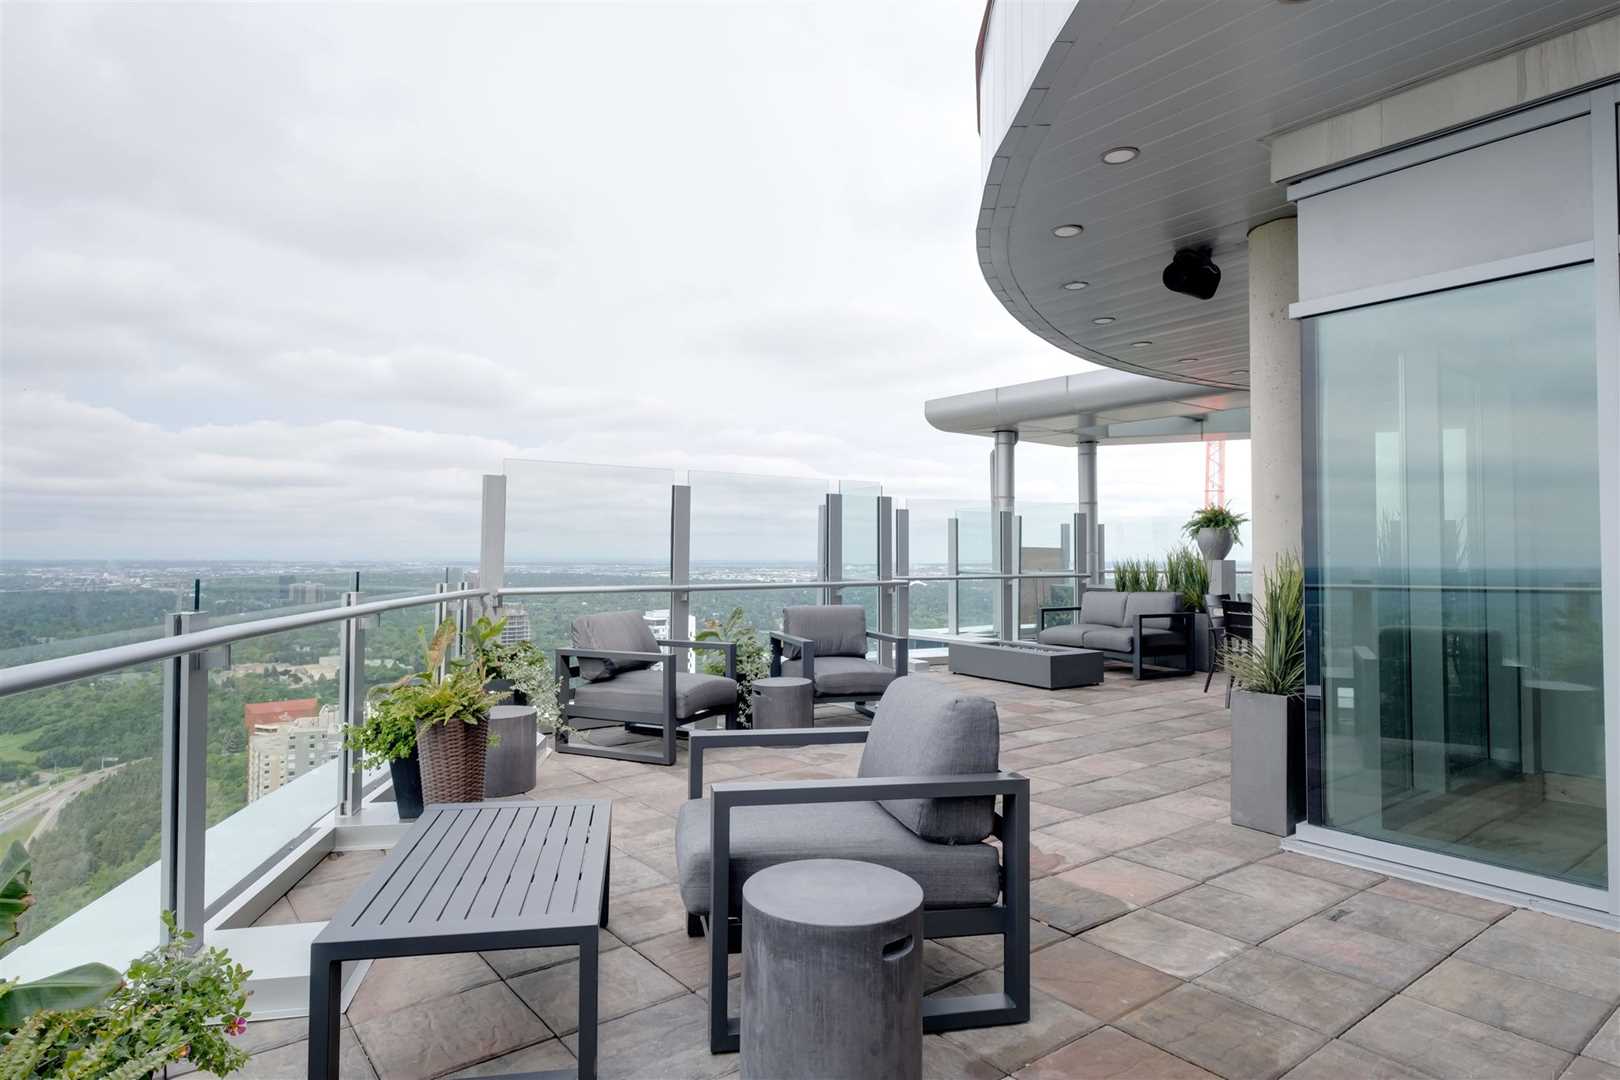 Penthouse curved patio with light grey and red stone floor on left, white building on right; dark grey cloth chairs and green potted plants throughout